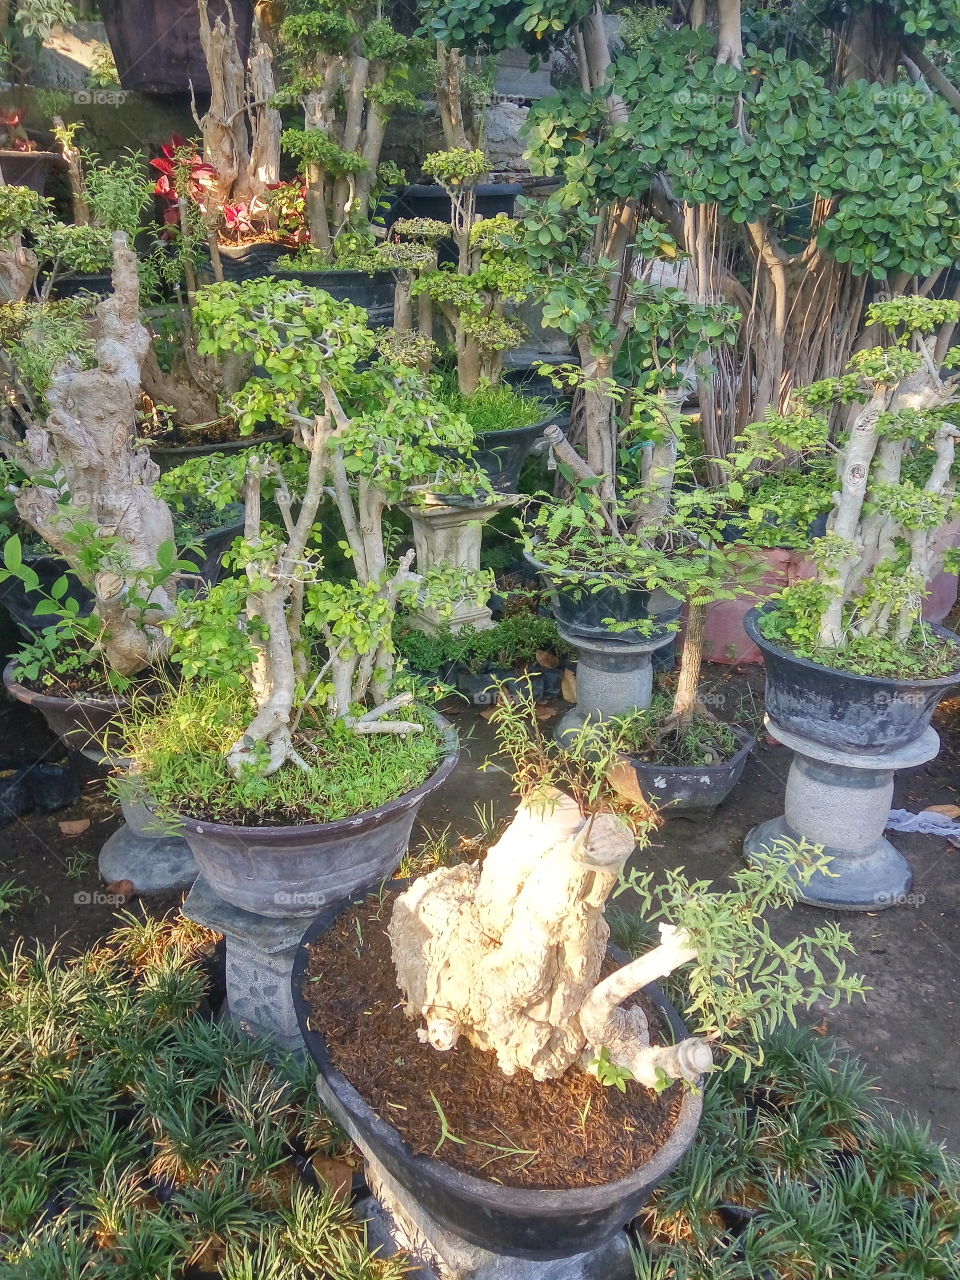 bonsai USD 500
the art of maintaining dwarf plants by prioritizing the beauty of plants. Crazy plant ...